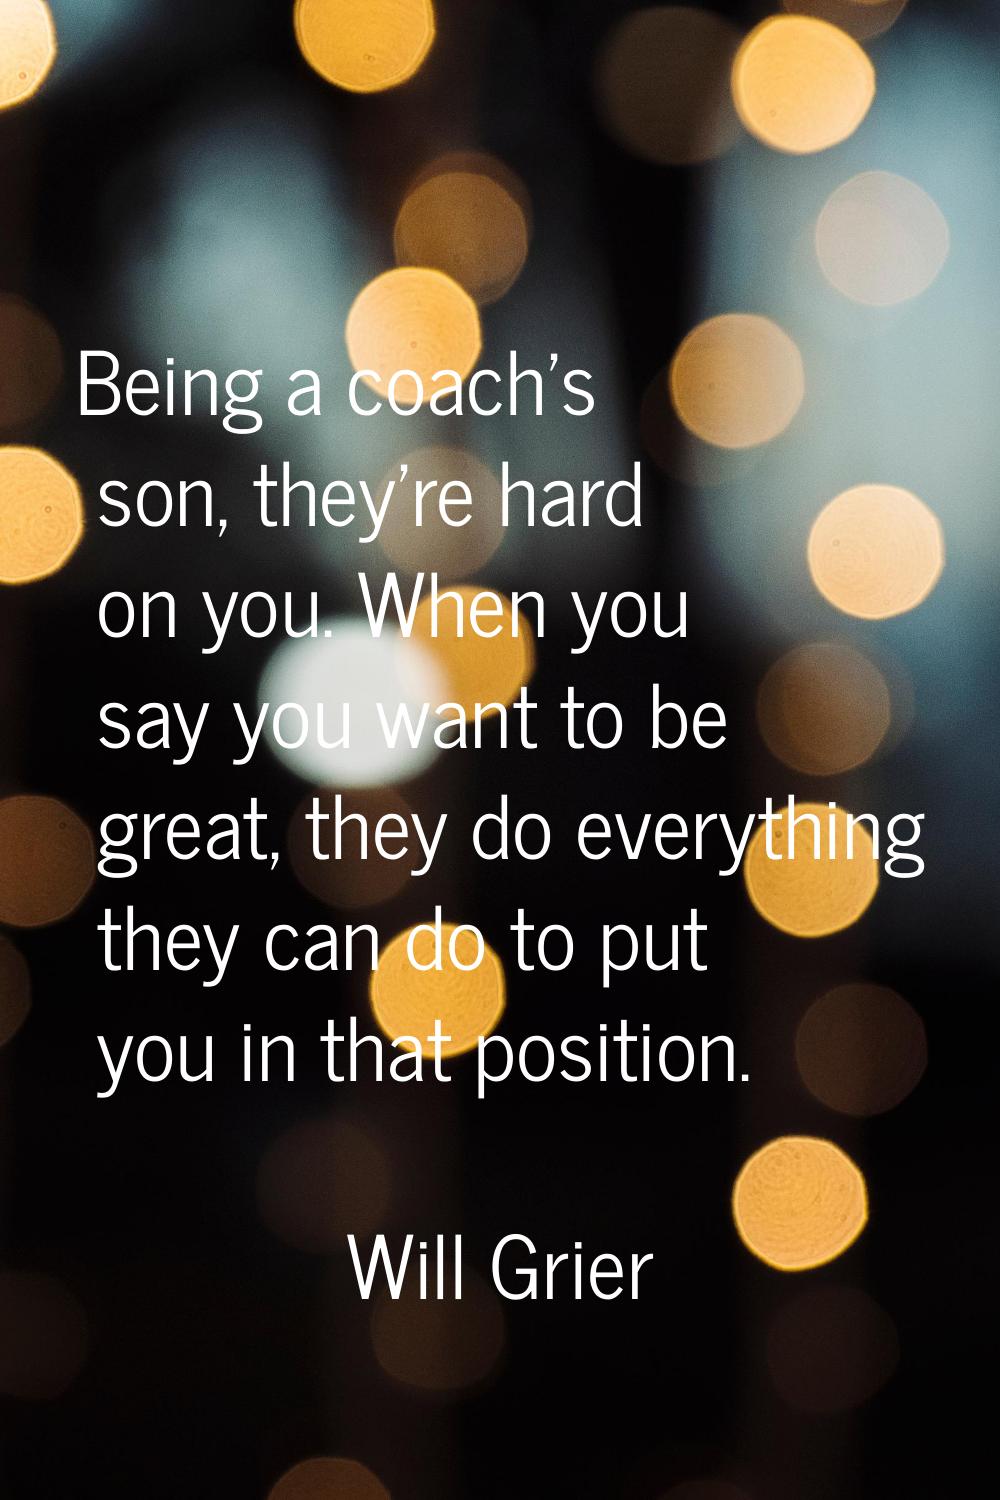 Being a coach's son, they're hard on you. When you say you want to be great, they do everything the